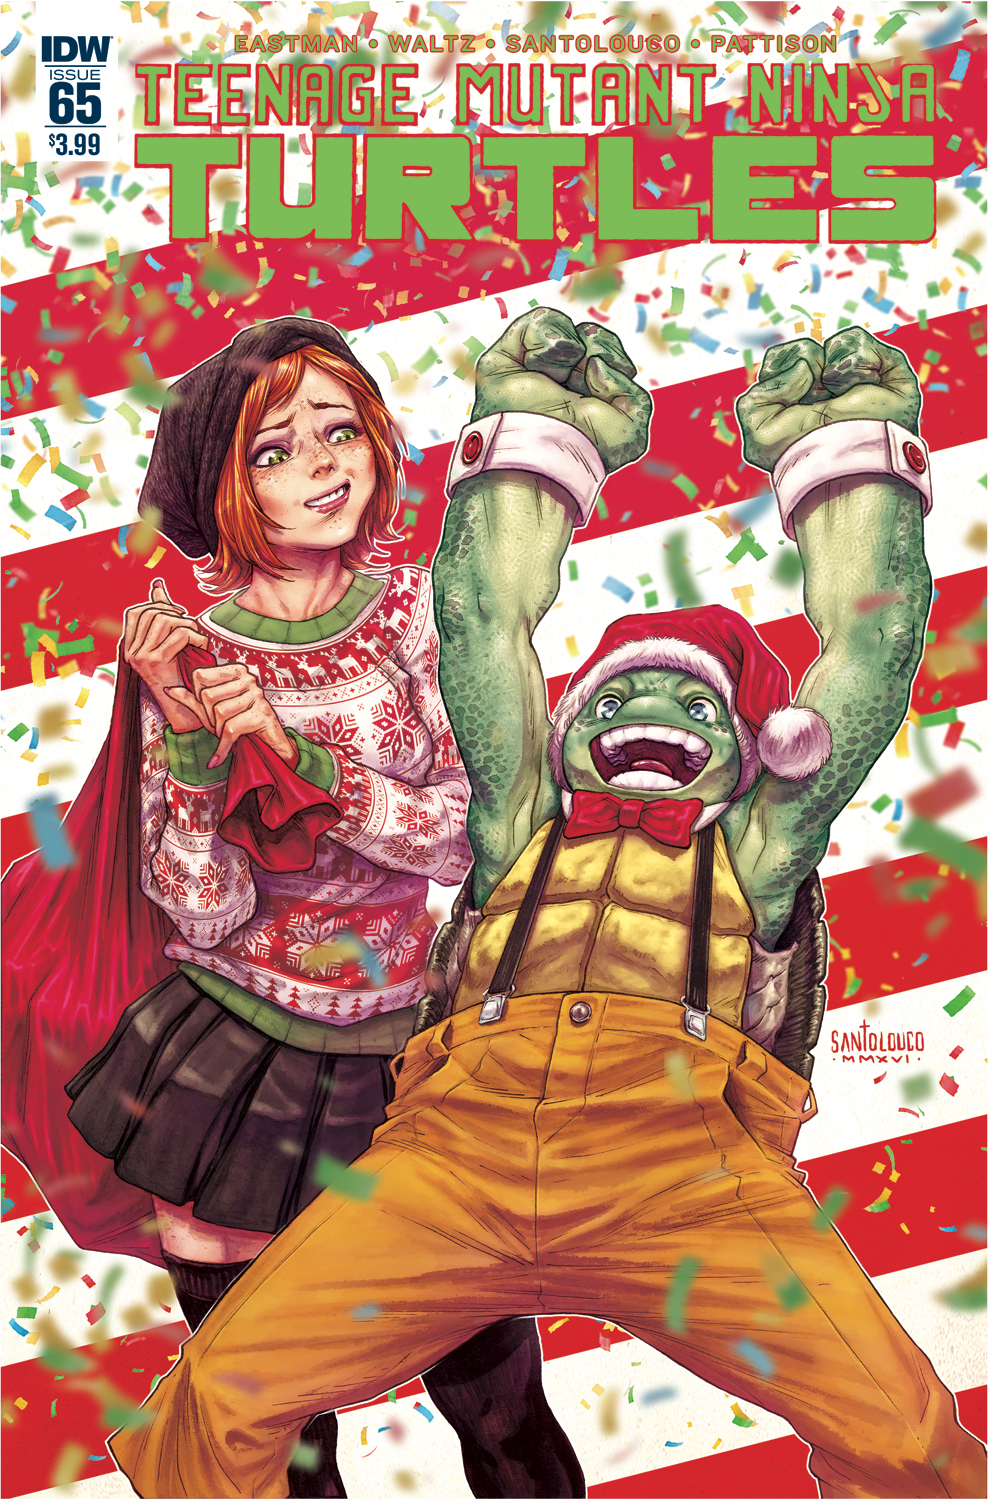 TMNT ONGOING #65